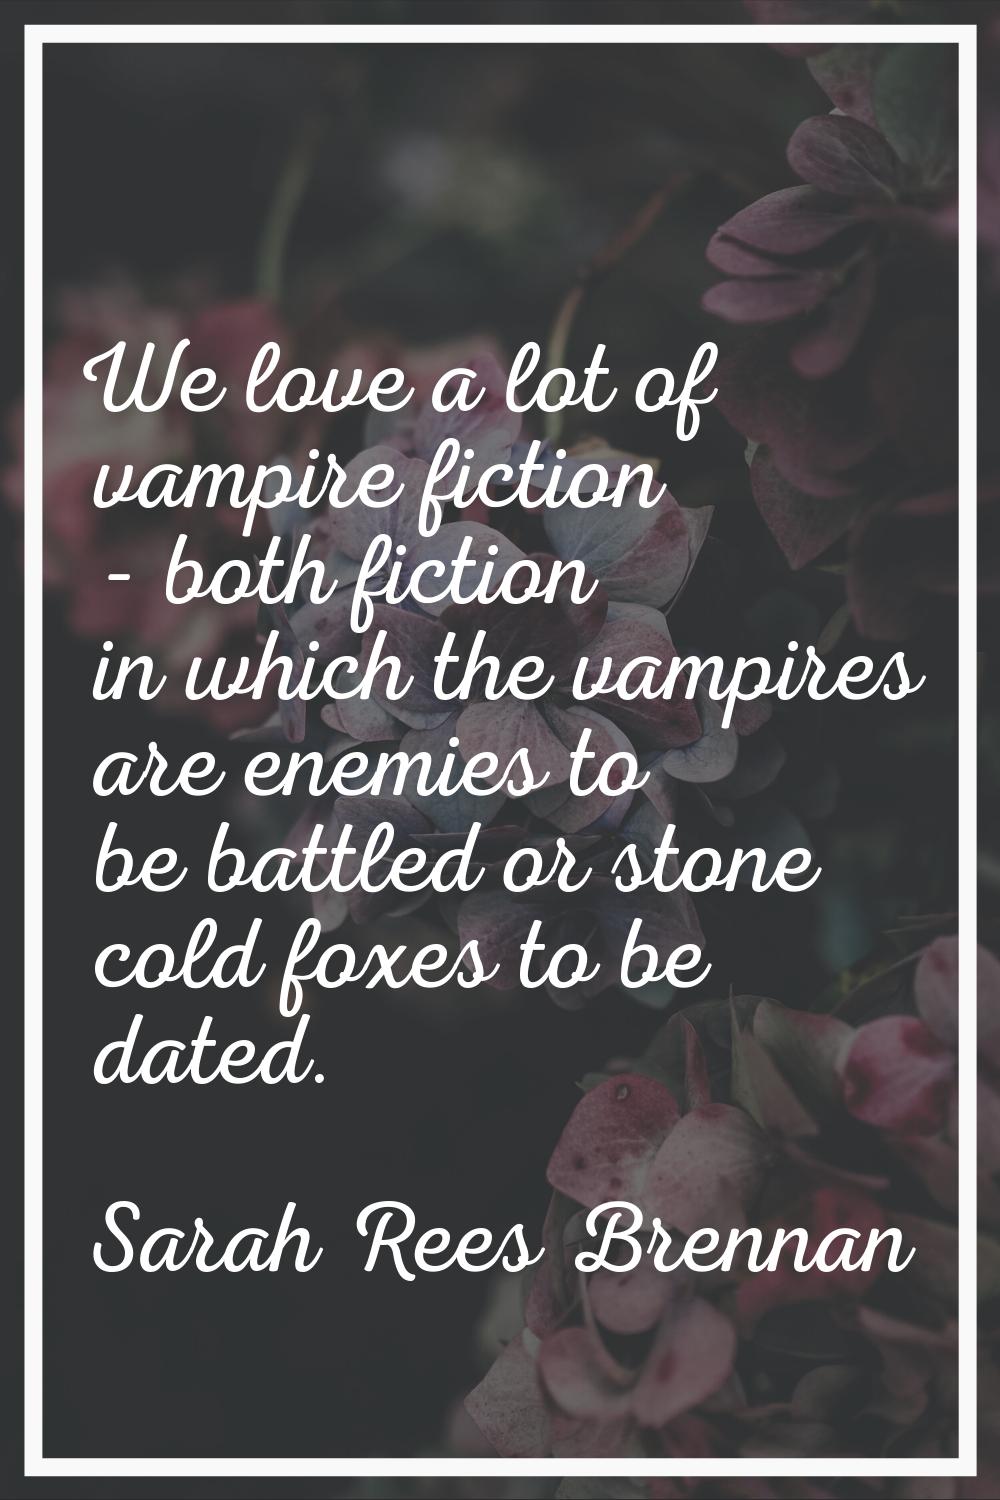 We love a lot of vampire fiction - both fiction in which the vampires are enemies to be battled or 